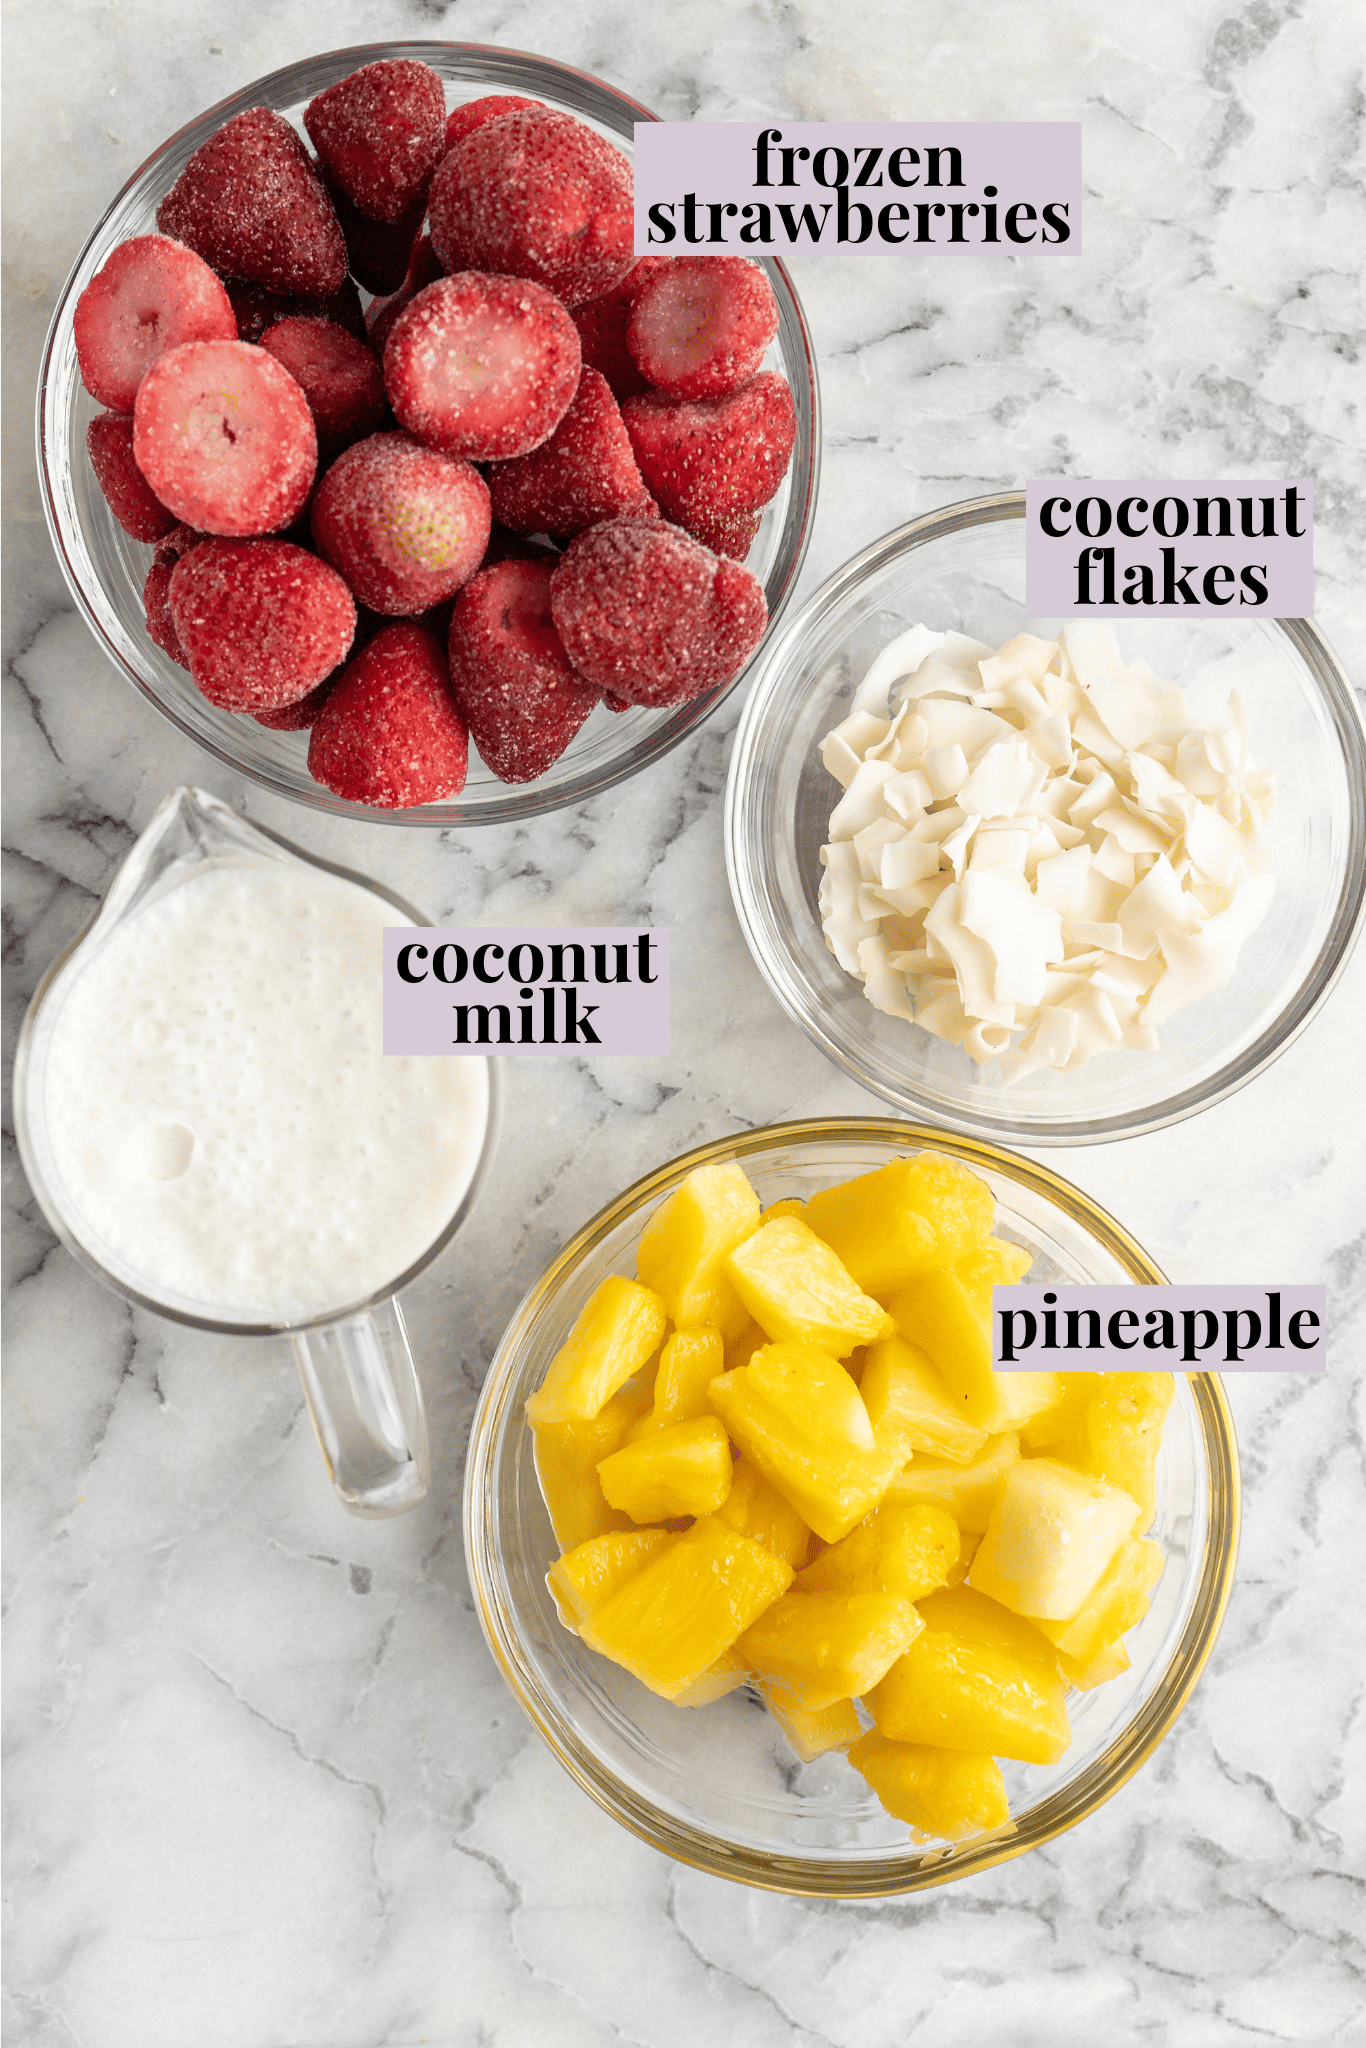 Overhead view of ingredients for strawberry pineapple smoothie